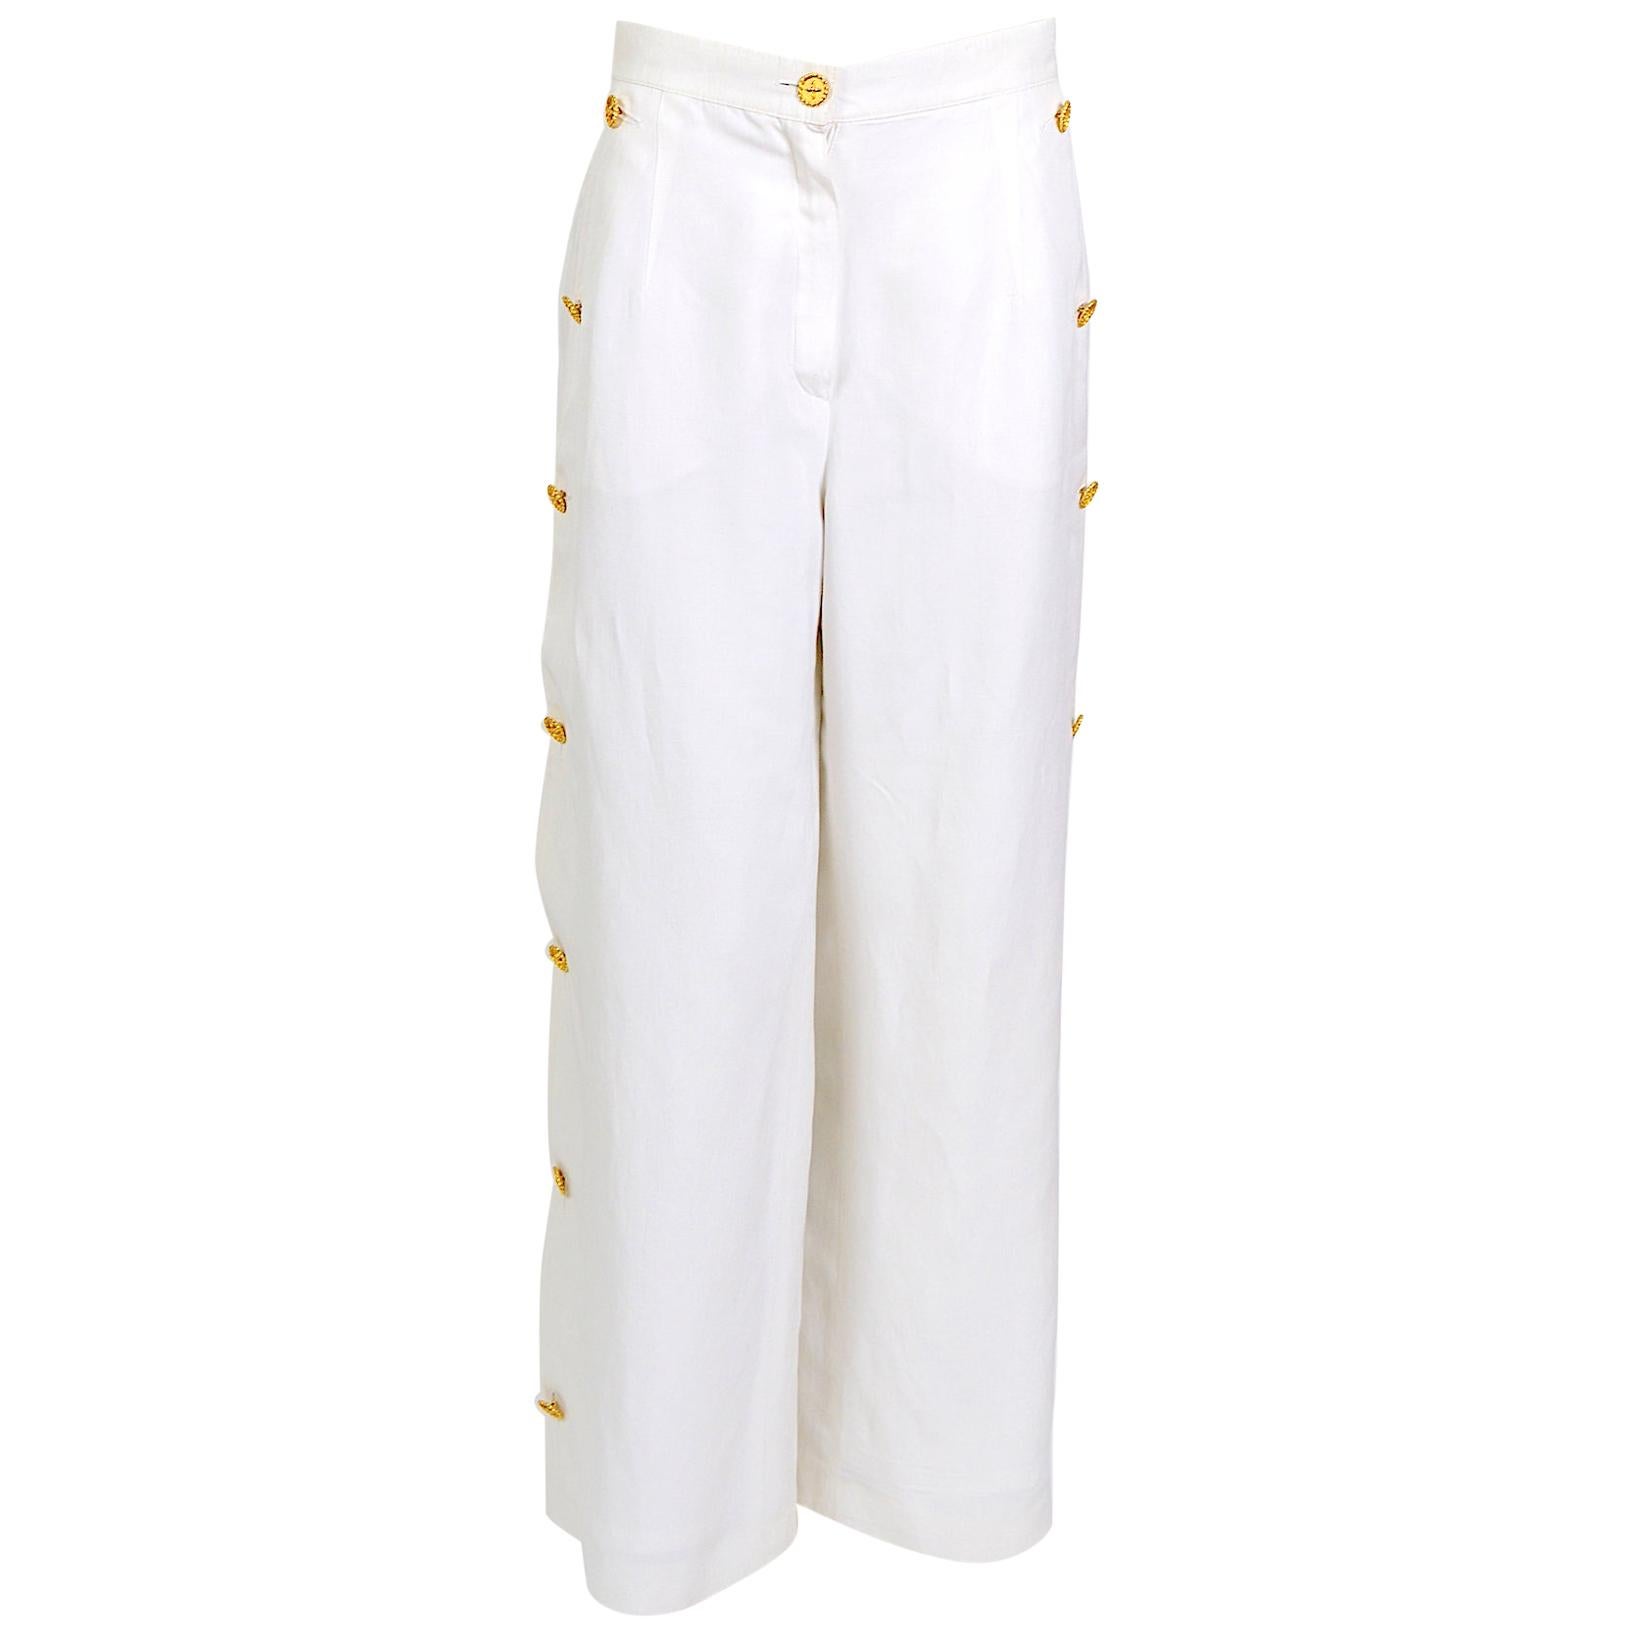 Louis Feraud vintage white linen and gold buttons trousers For Sale